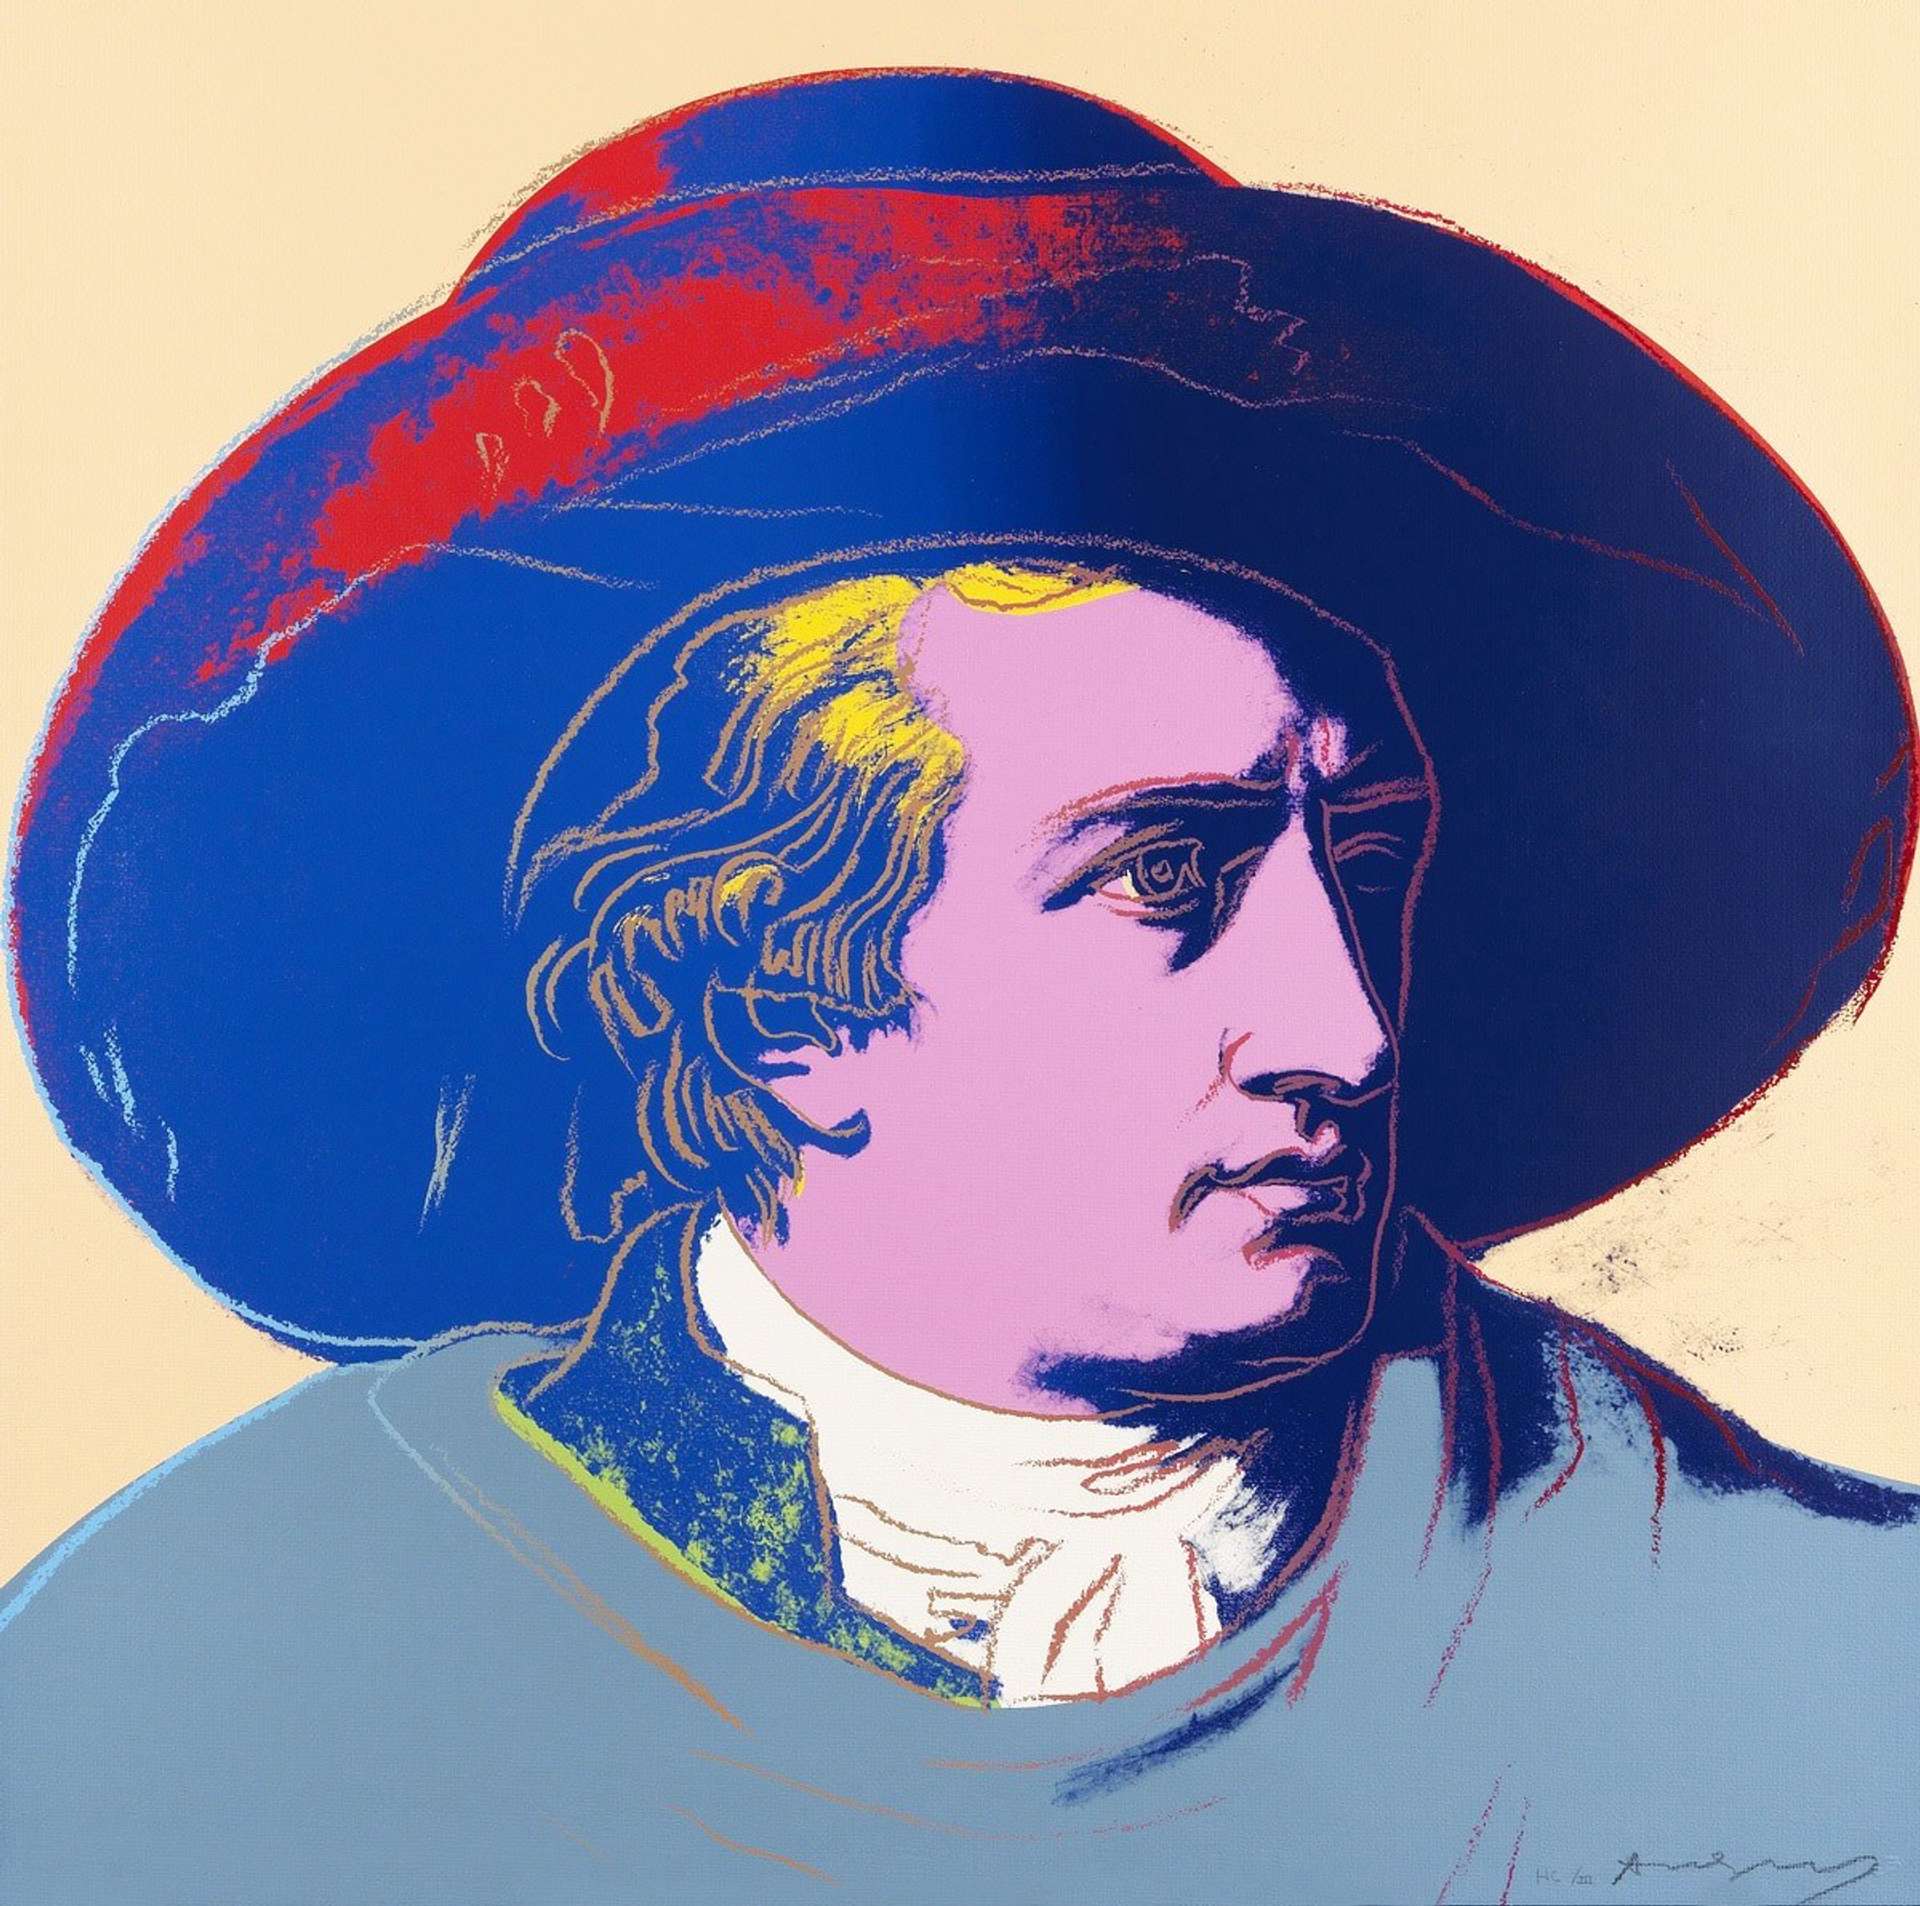 10 Facts About Andy Warhol's Goethe